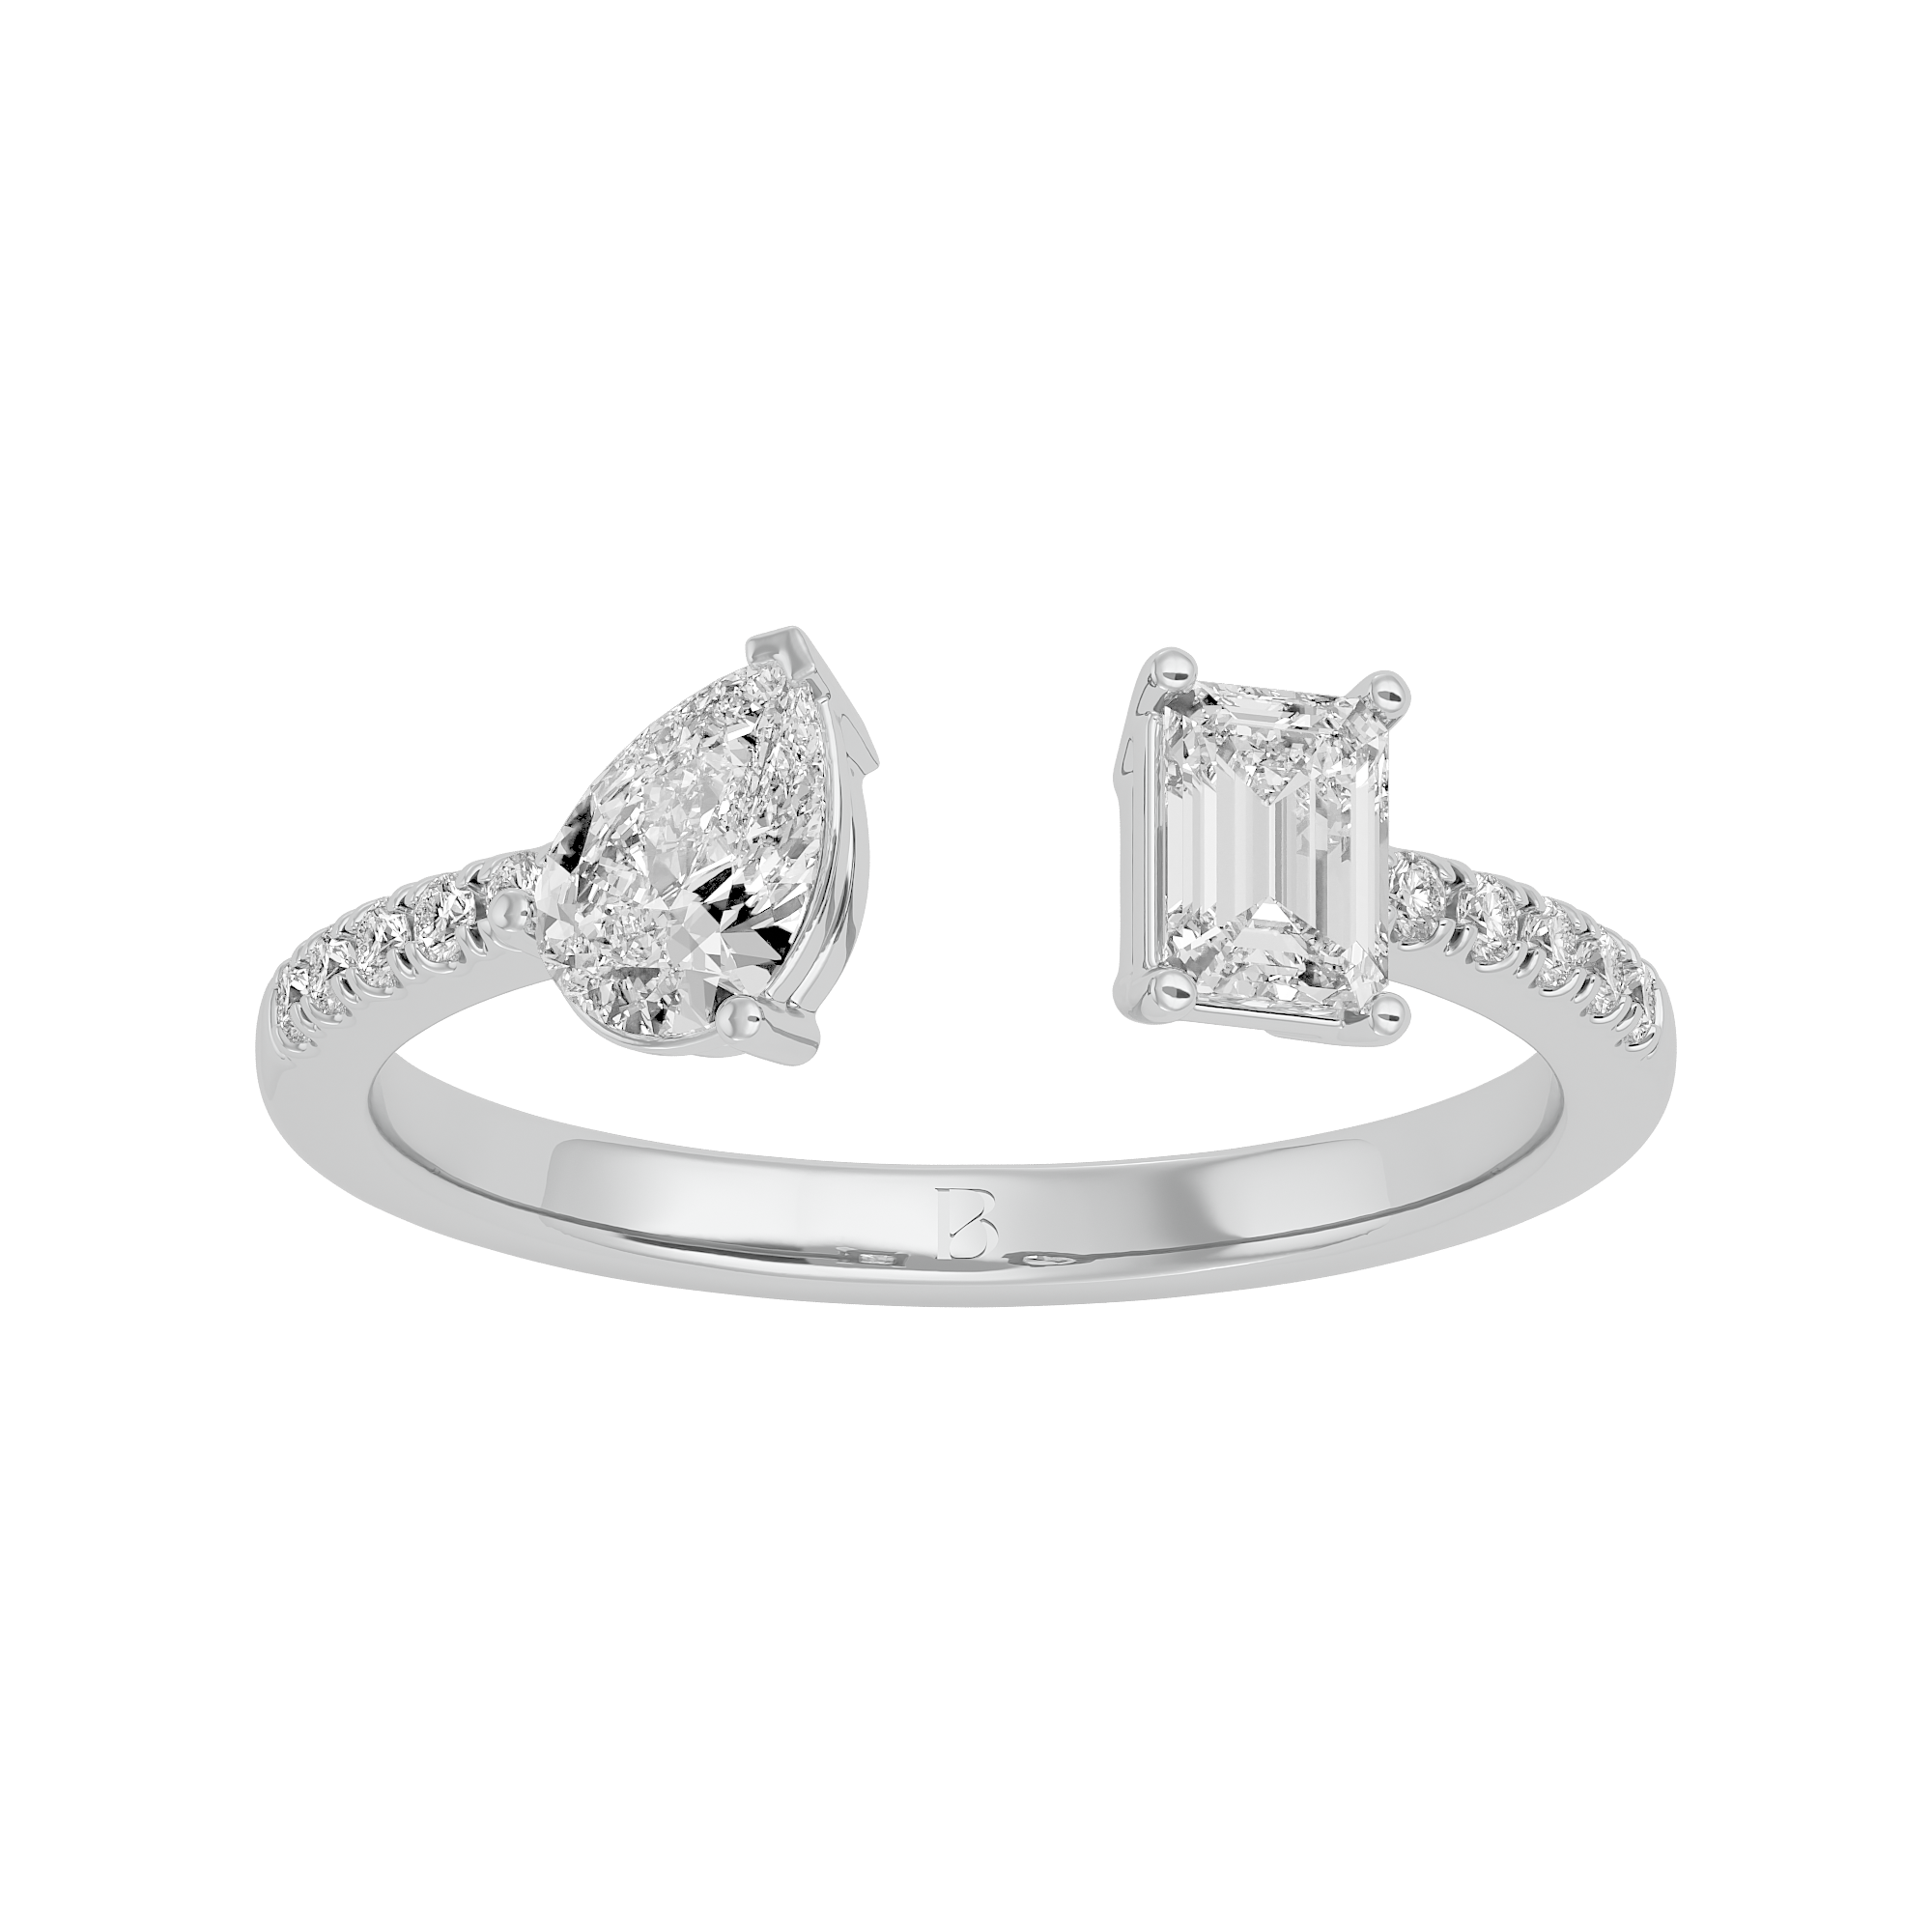 Charisma Solitaire Lab Grown Diamond Ring in White Gold